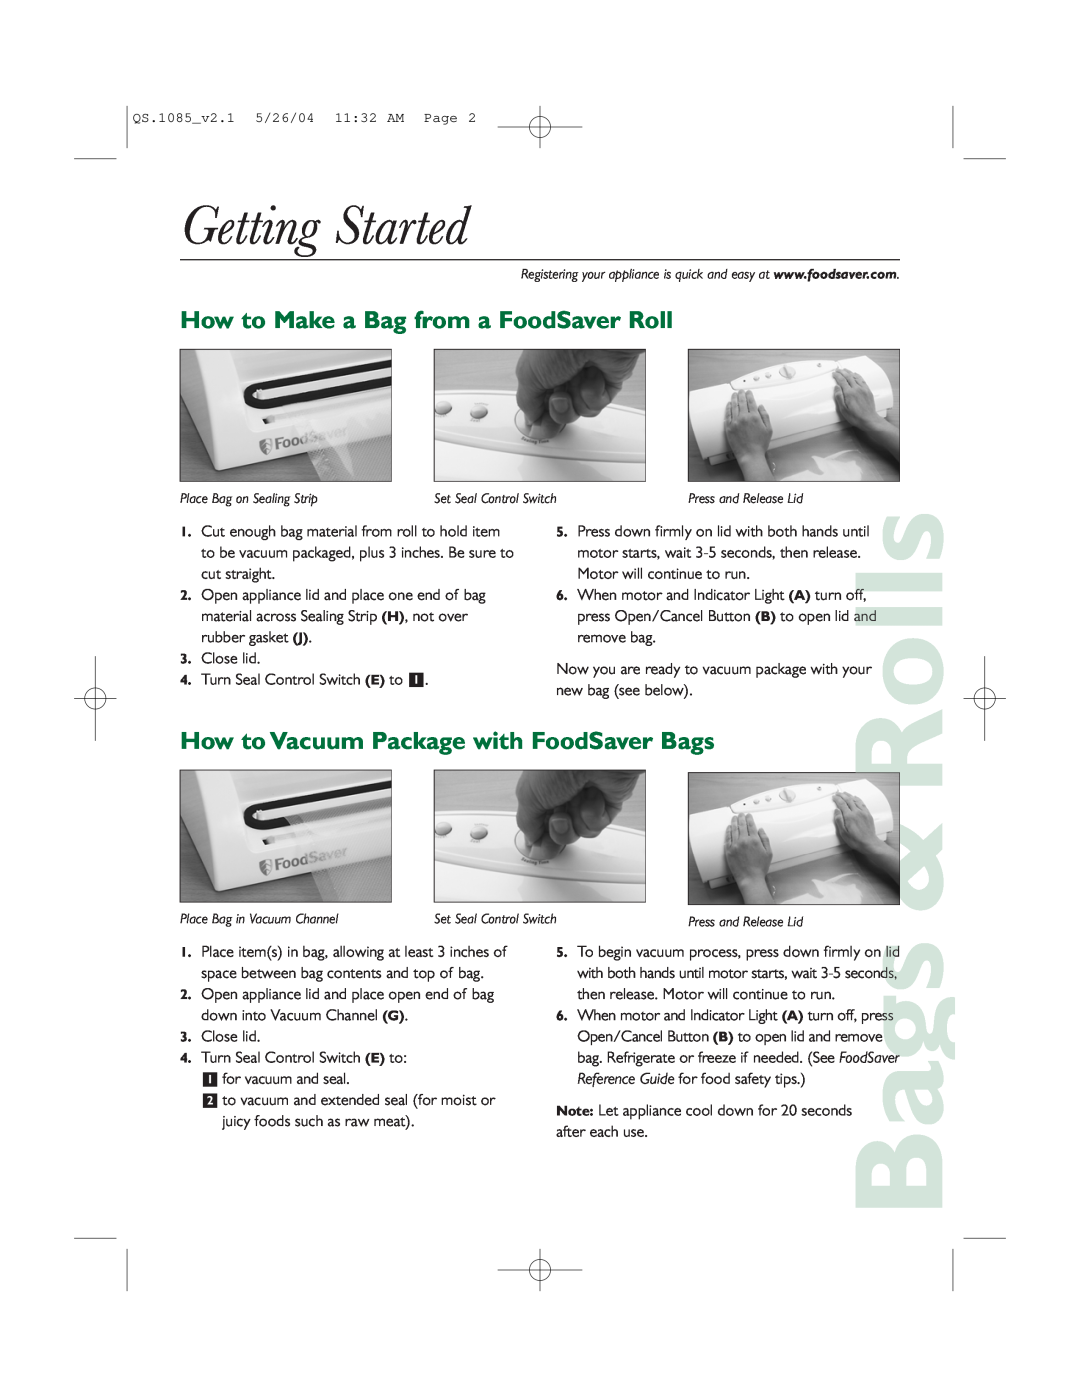 FoodSaver V1085 Getting Started, How to Make a Bag from a FoodSaver Roll, How to Vacuum Package with FoodSaver Bags, Rolls 